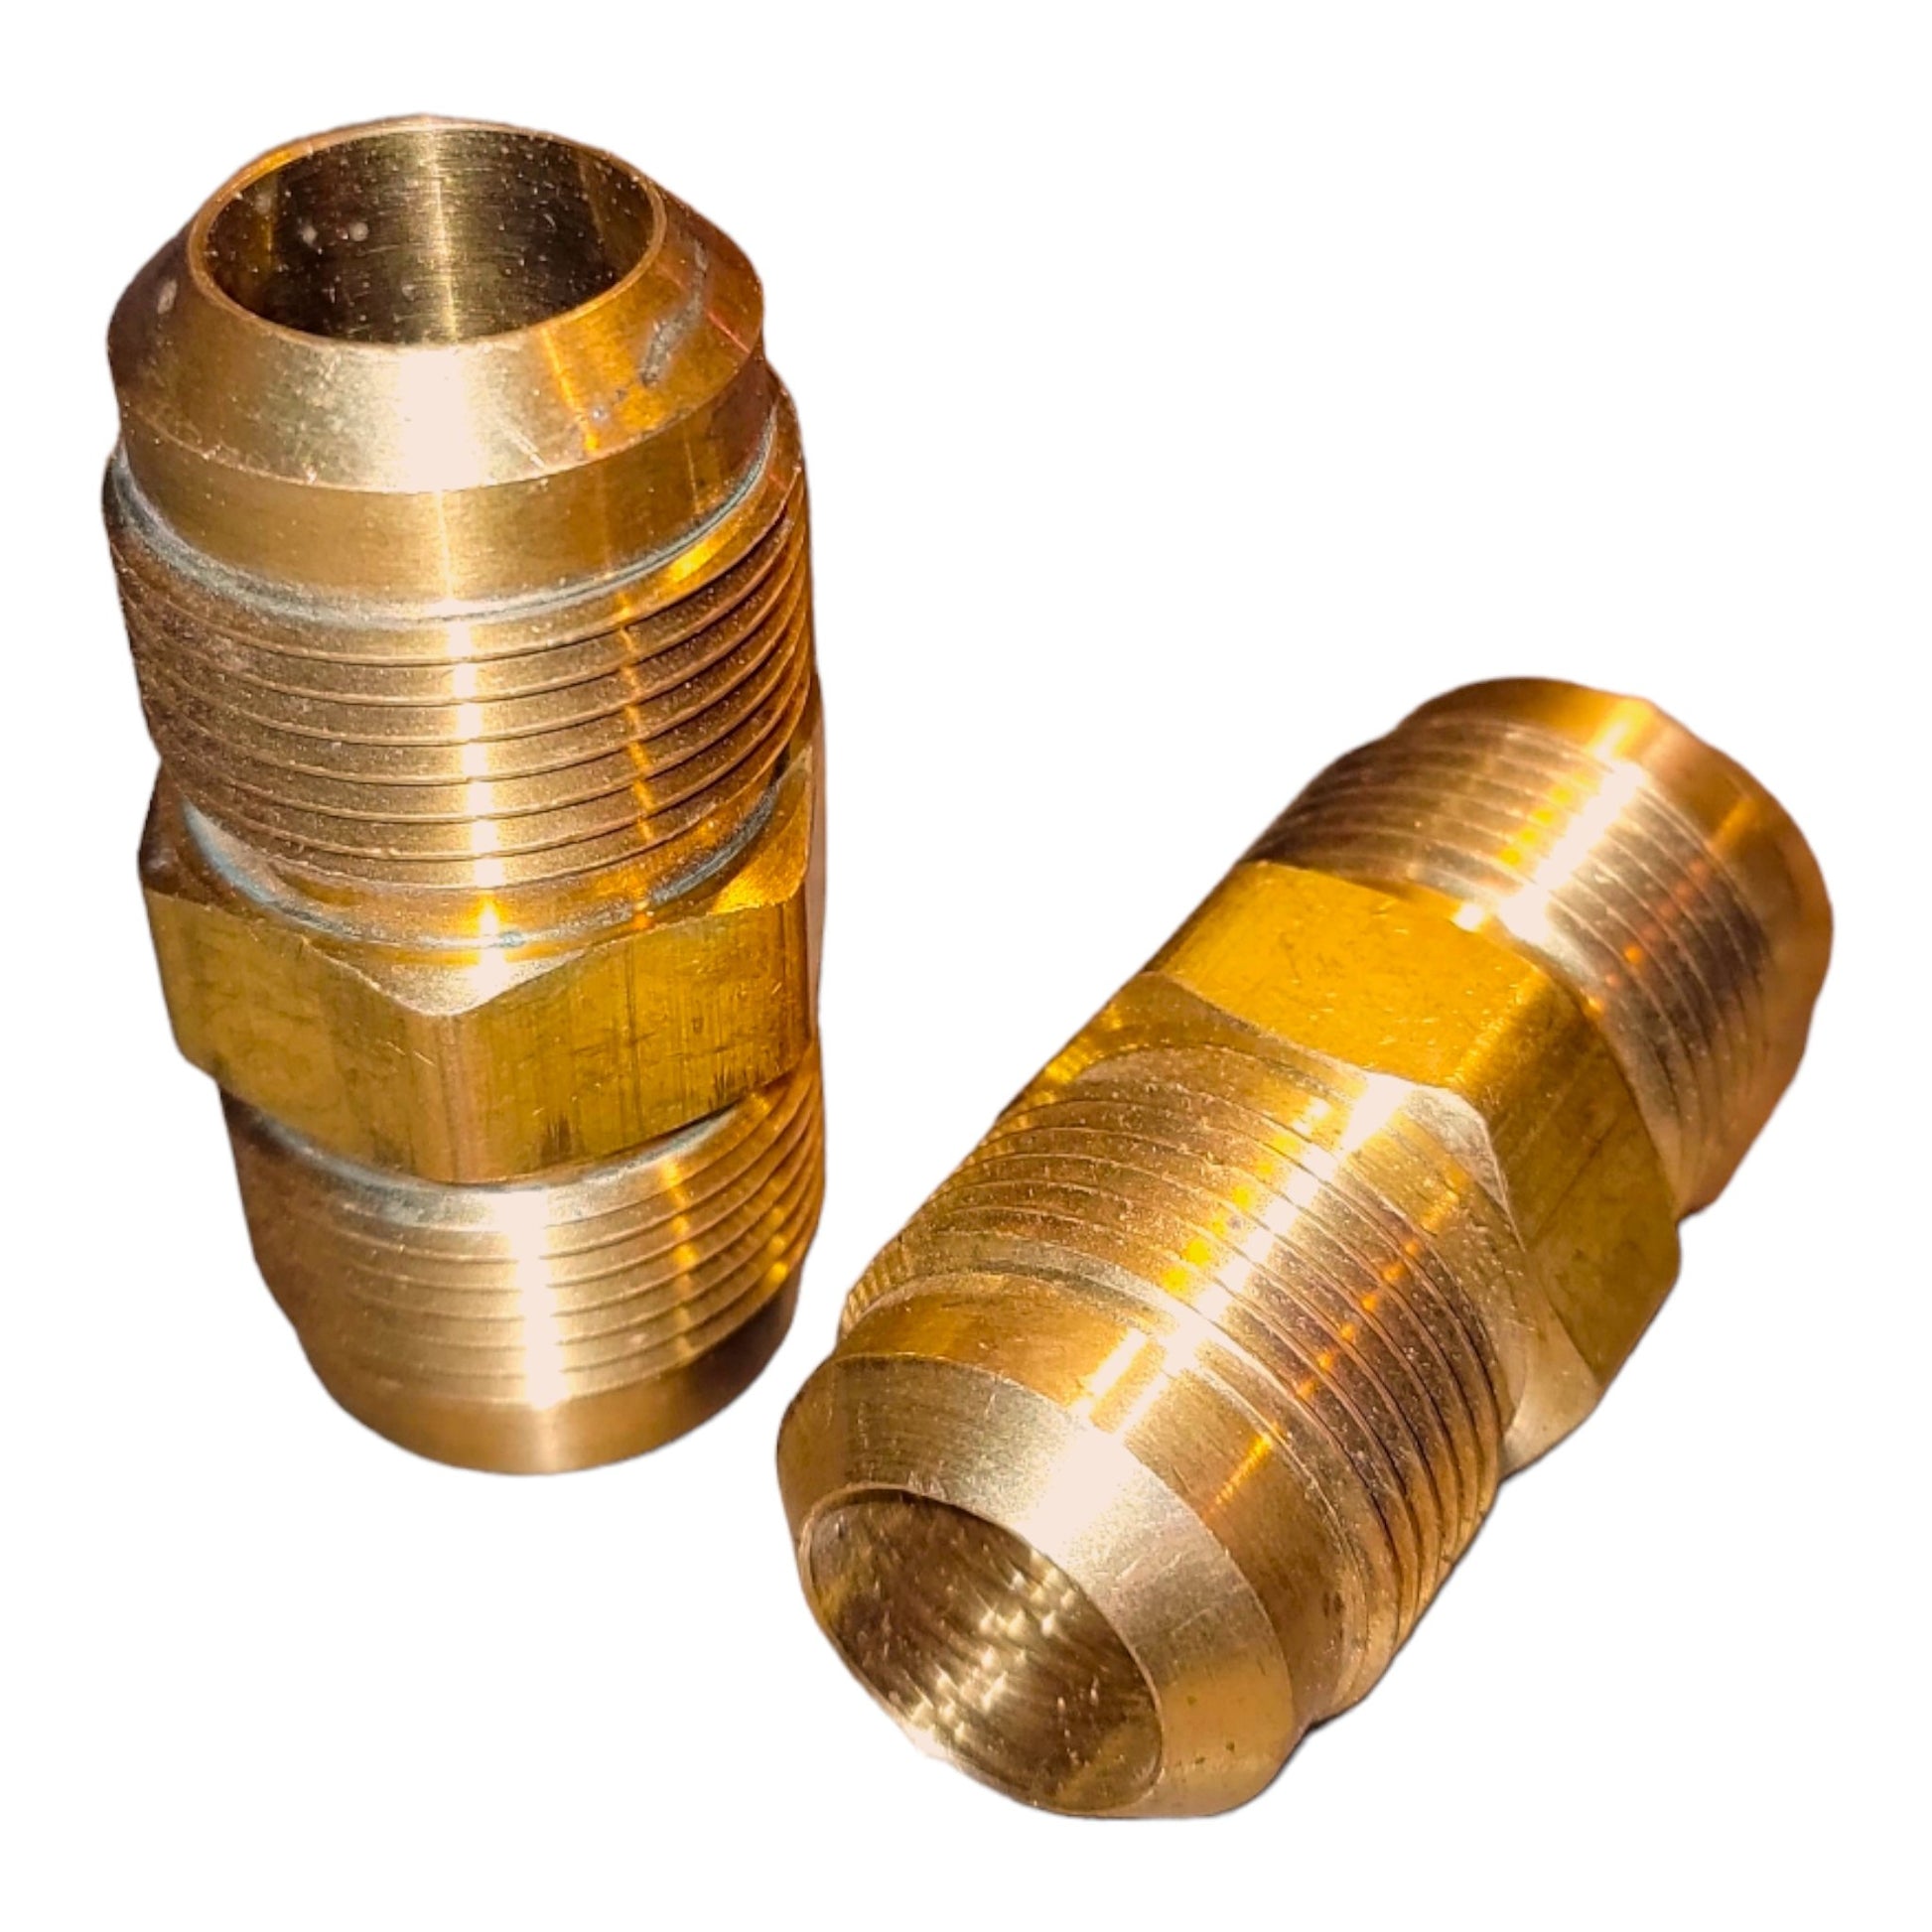 Brass 45° Flare Fittings